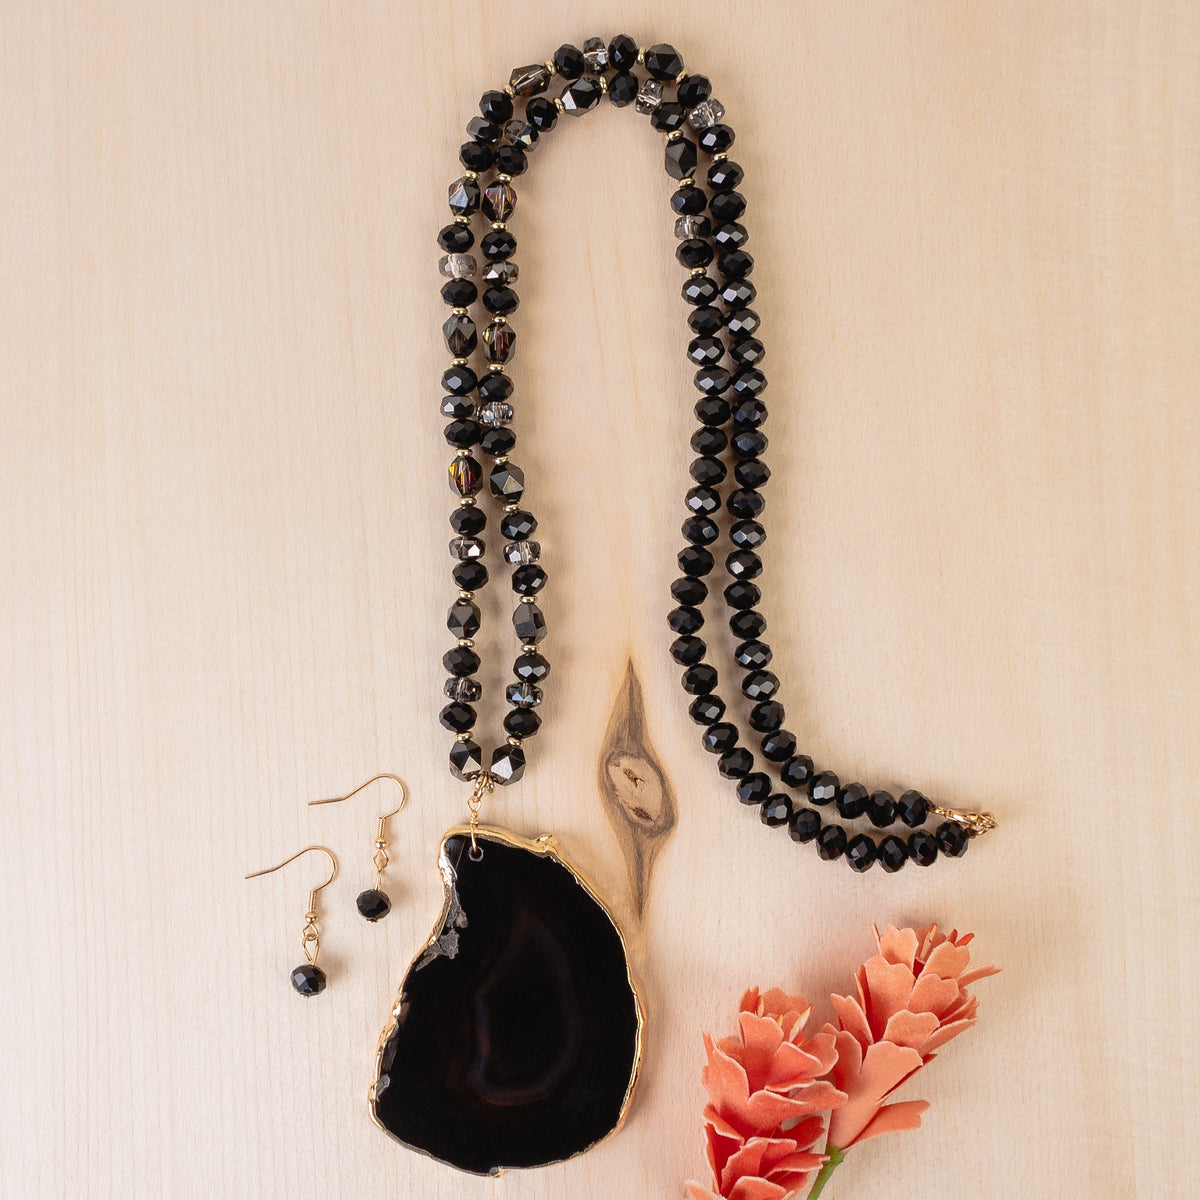 72976 - Natural Stone Necklace - Black